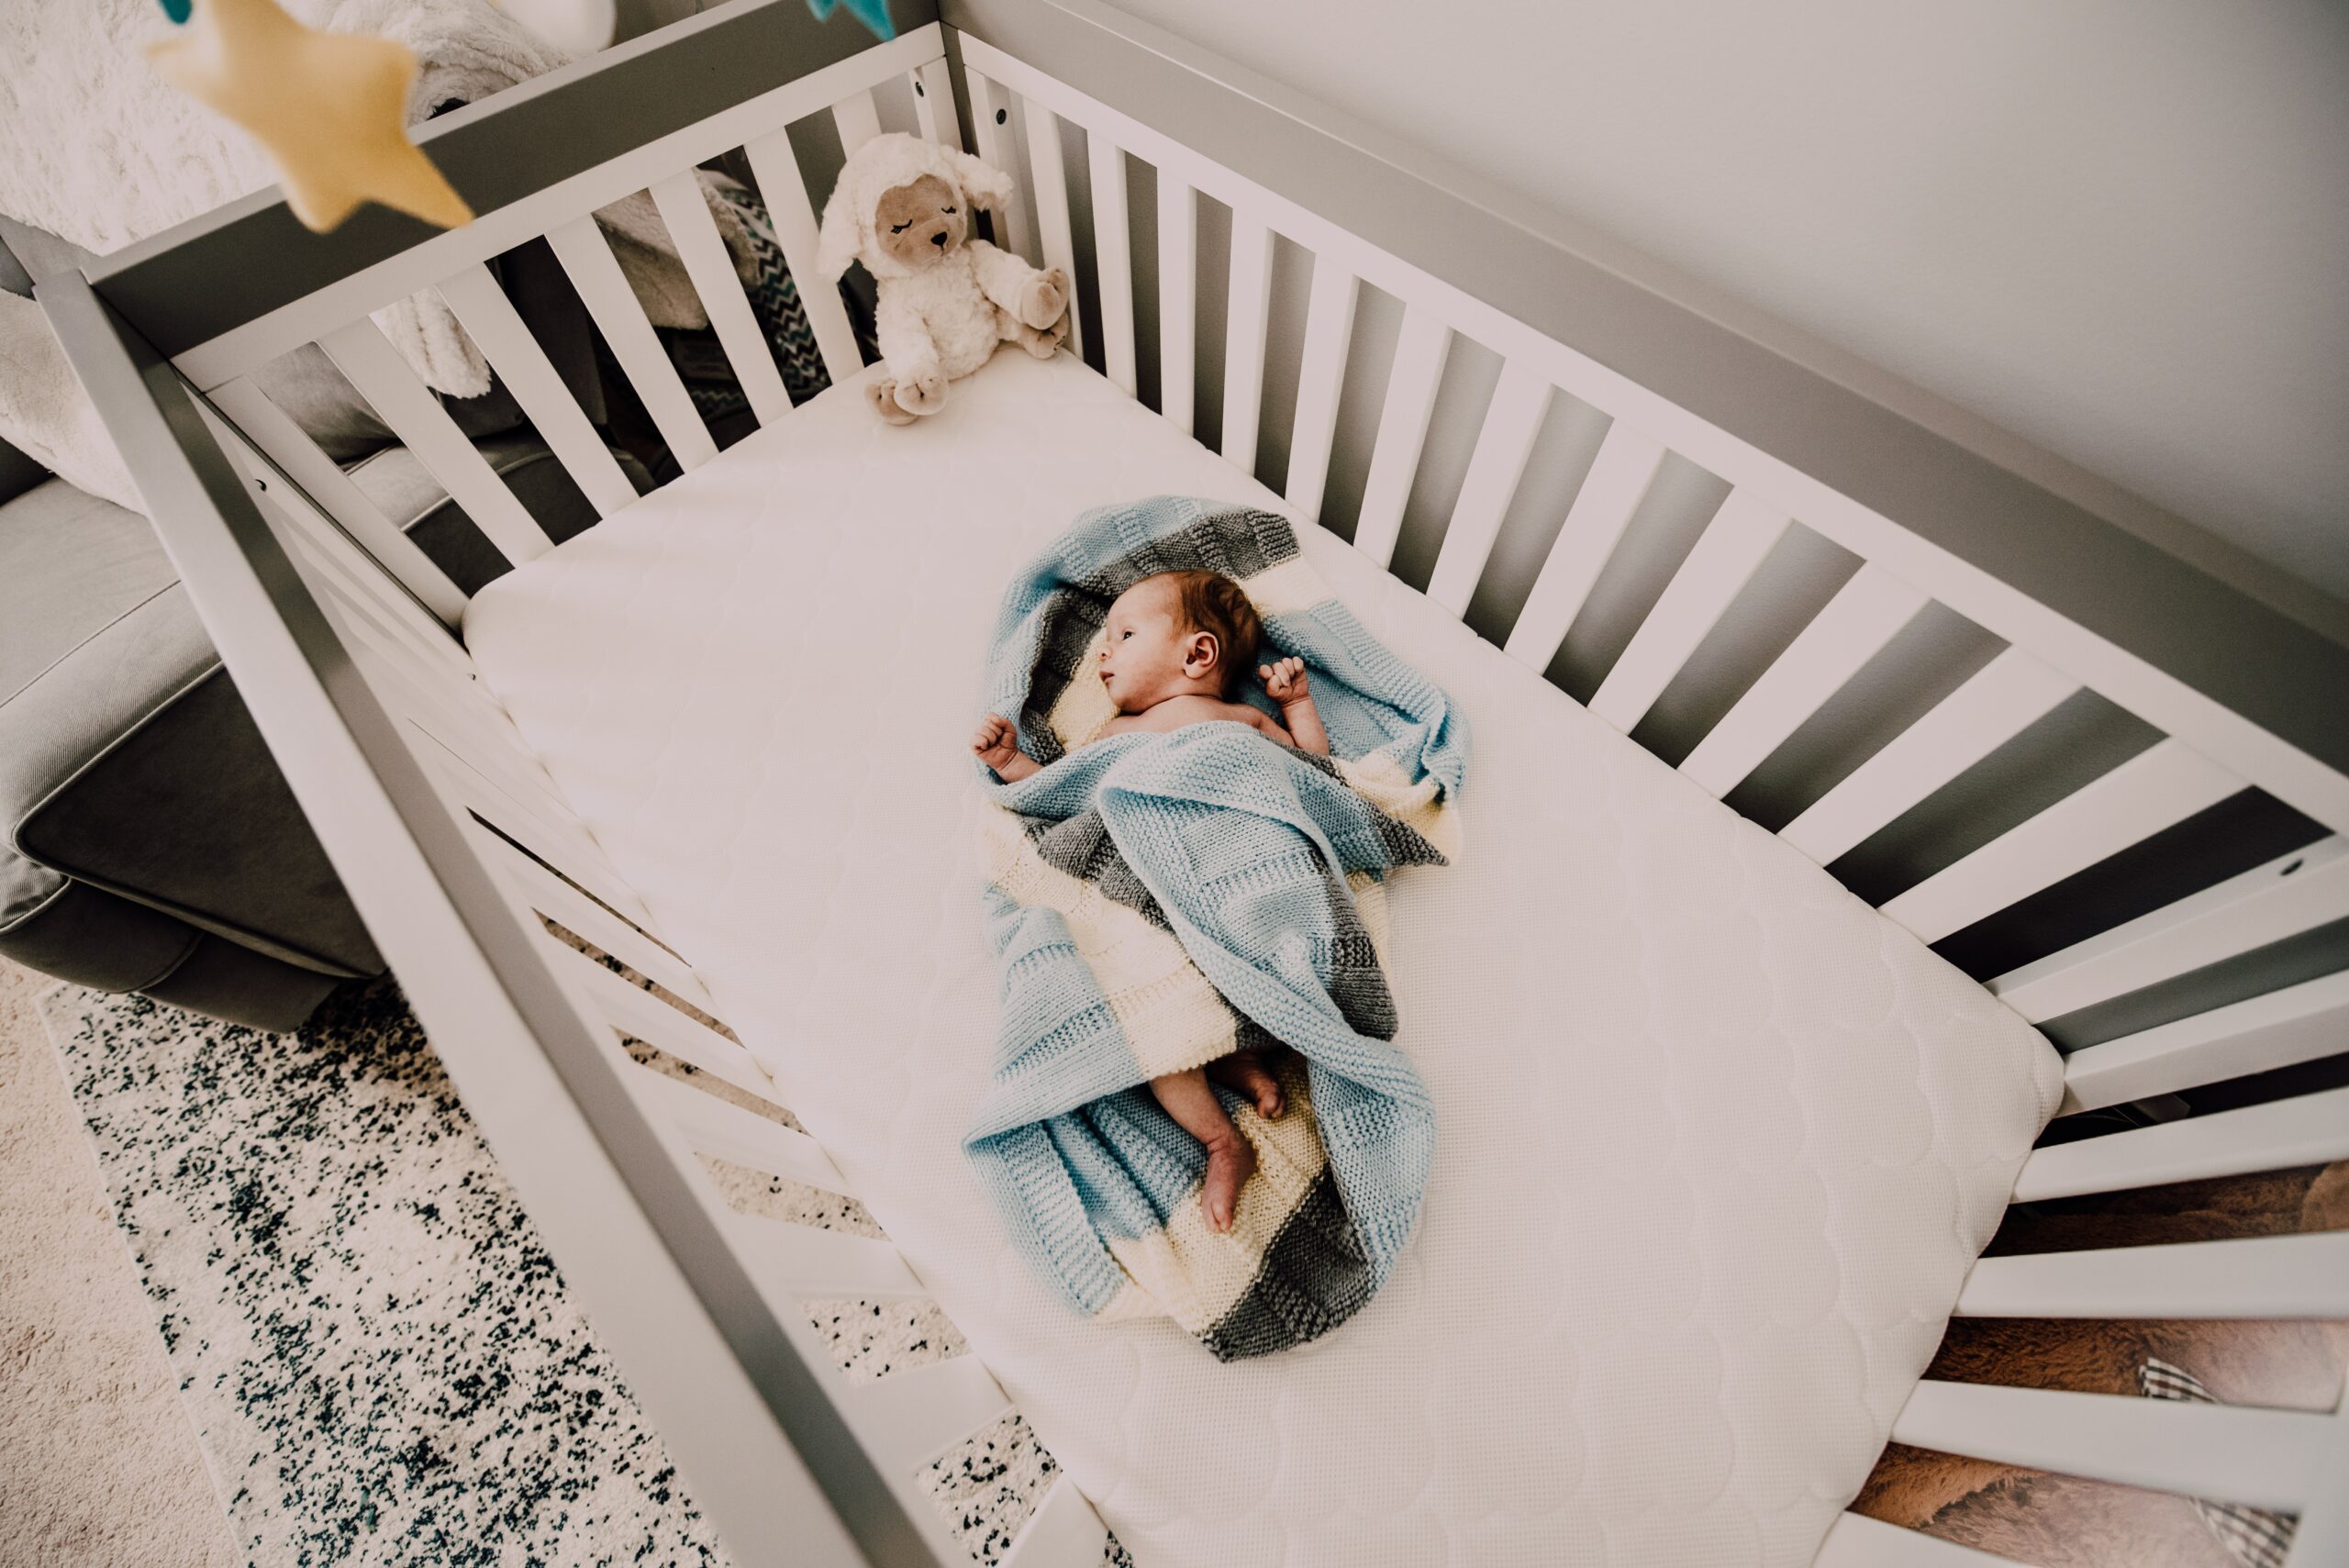 7 Features Every Parent Should Look For In A Baby Monitor